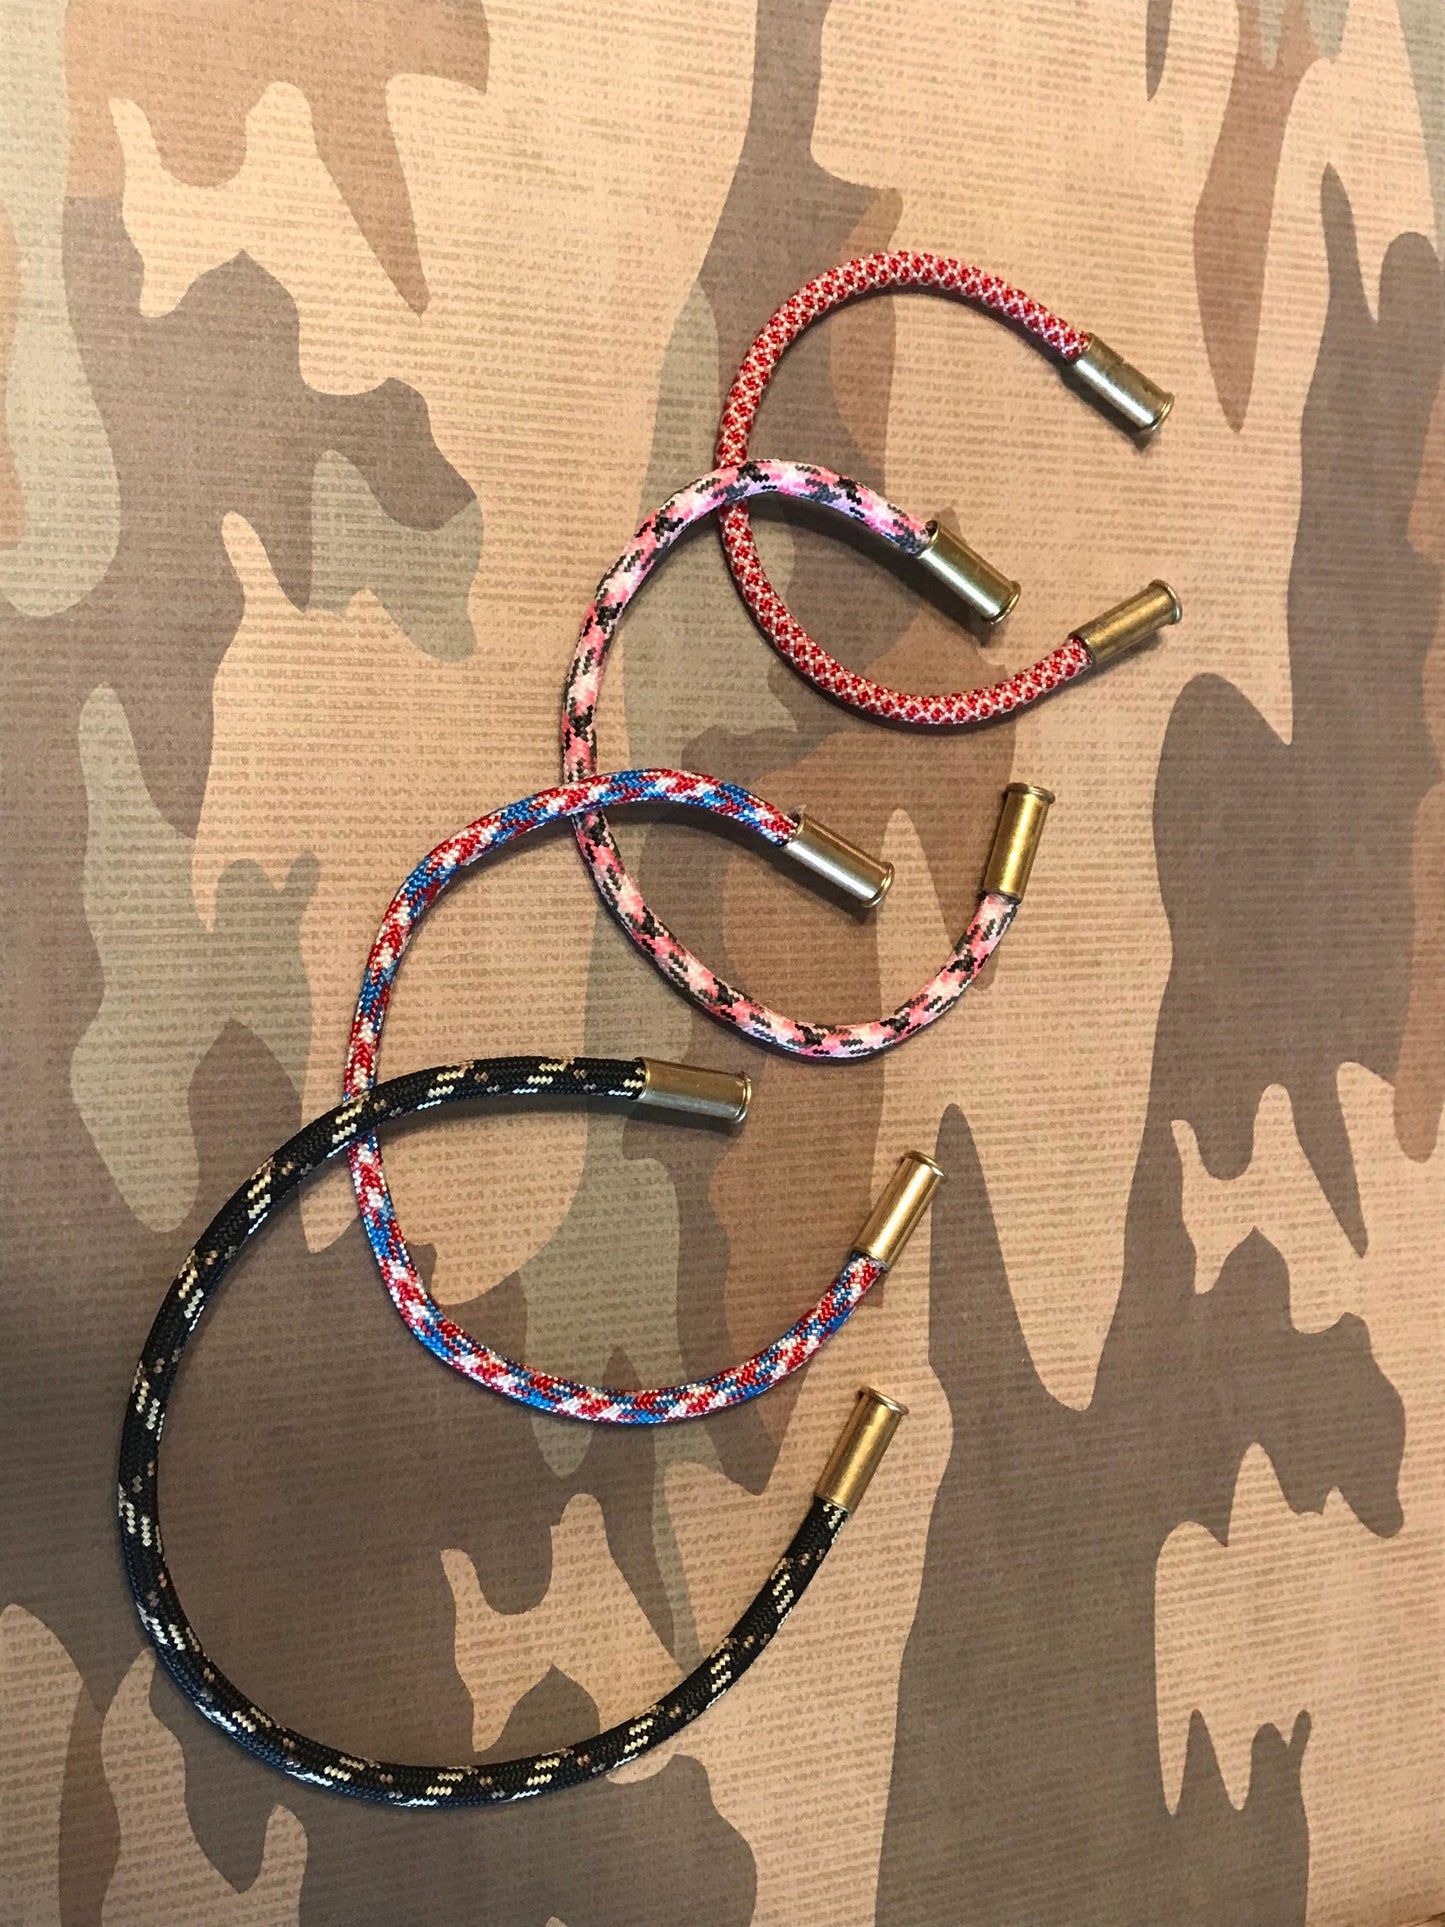 Paracord bracelet with recycled .22 shells